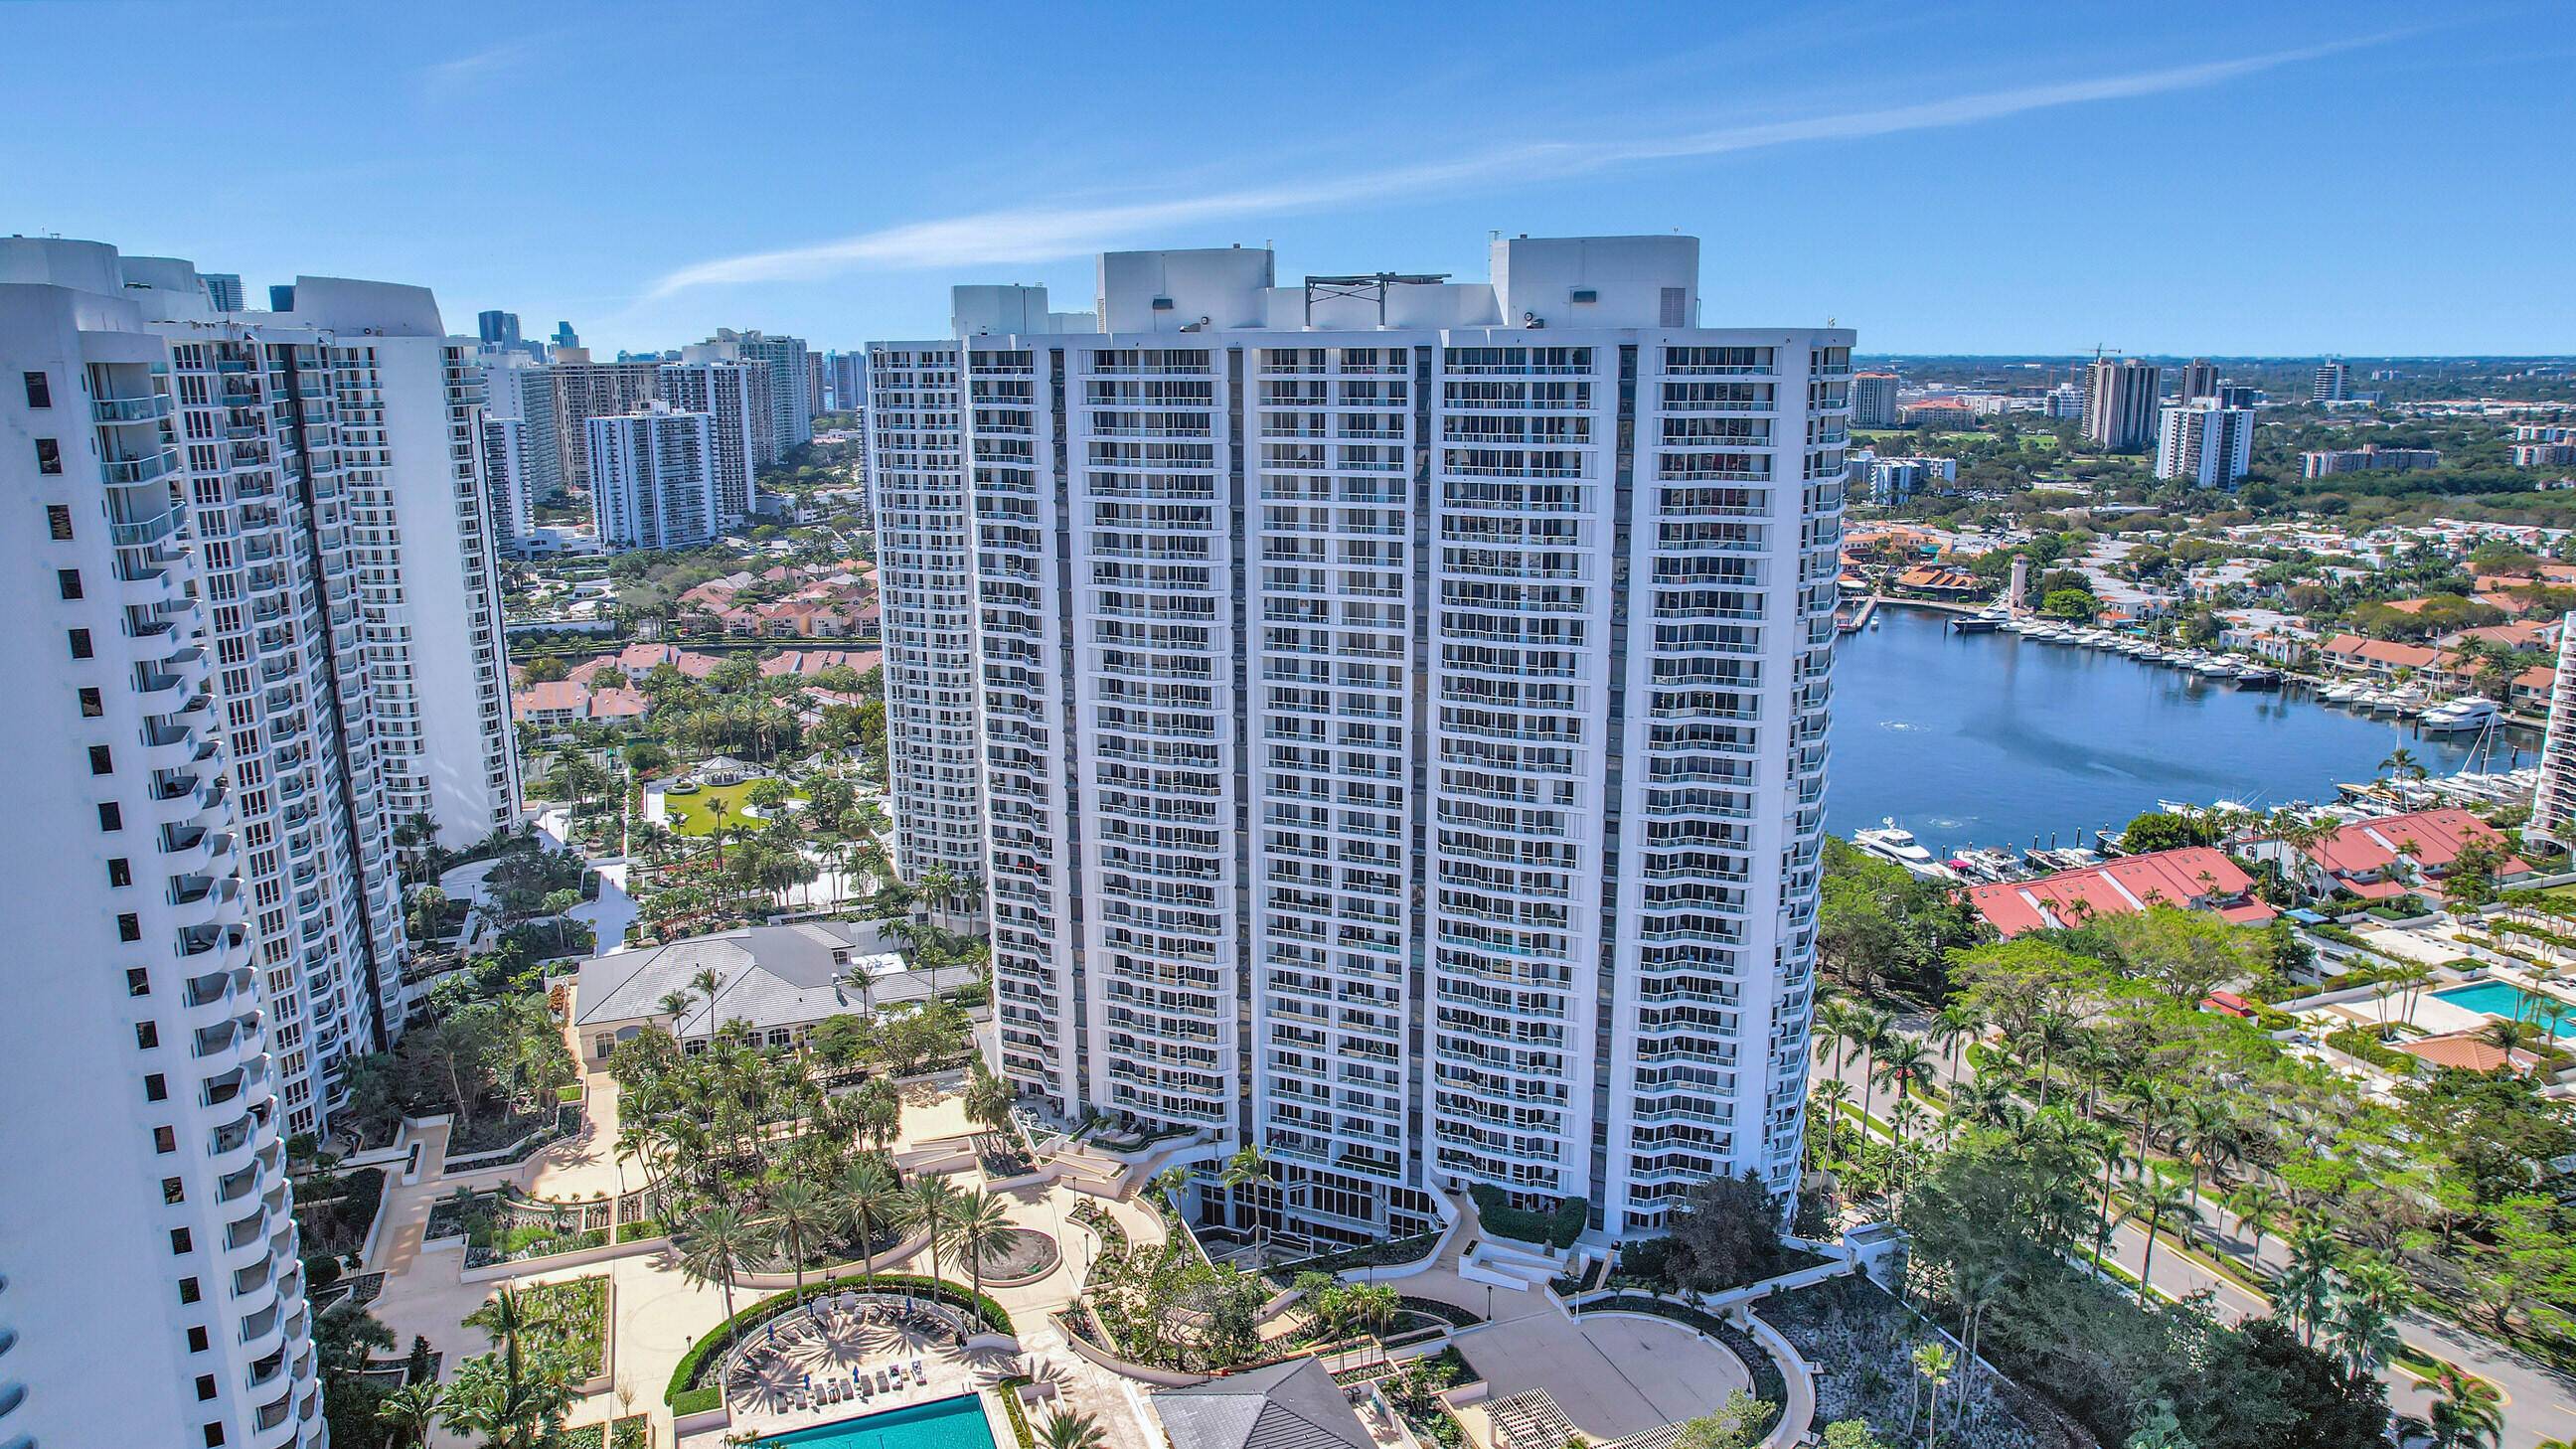 This condominium is situated in the prestigious and highly sought after location of Aventura.